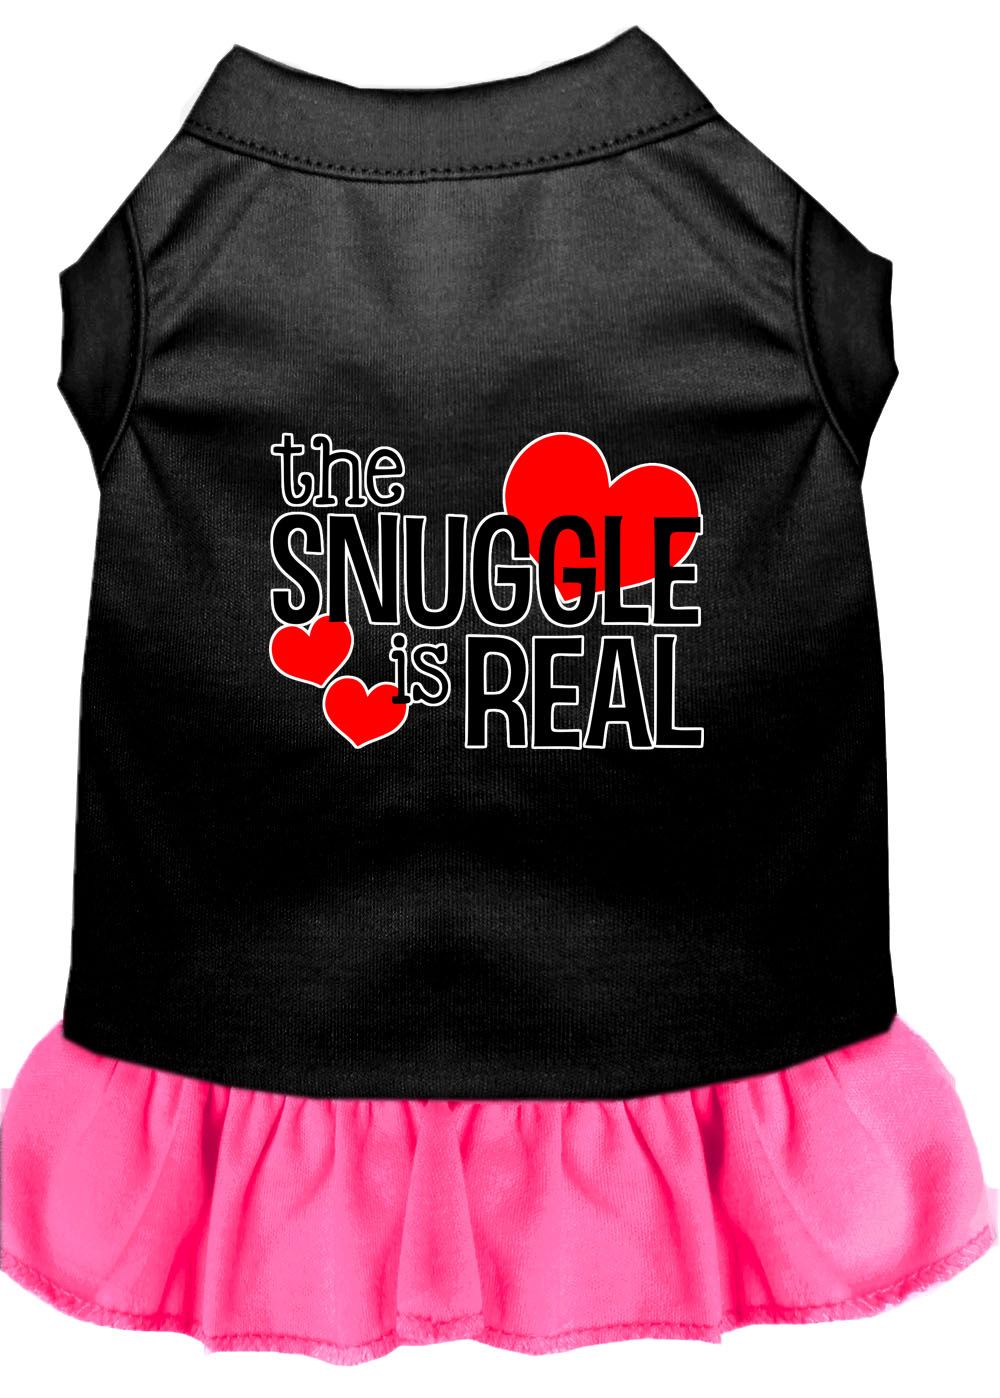 The Snuggle is Real Screen Print Dog Dress Black with Bright Pink XS